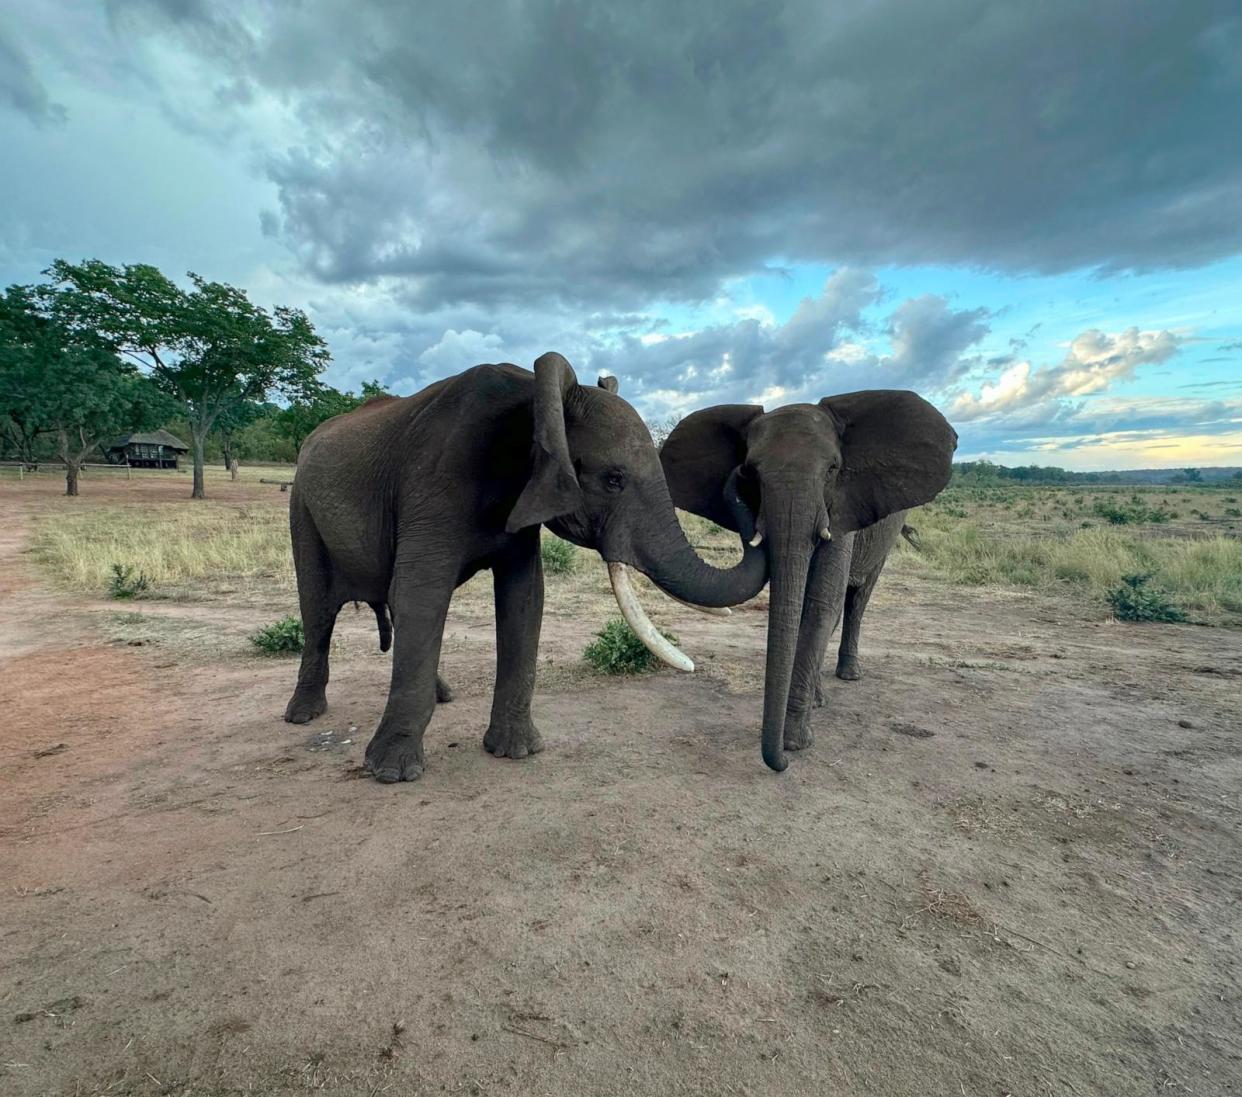 PHOTO: Doma (male) and Kariba (female) greeting. Doma touches Kariba's temporal gland while flapping his ears and Kariba holds her ears spread. (Vesta Eleuteri)